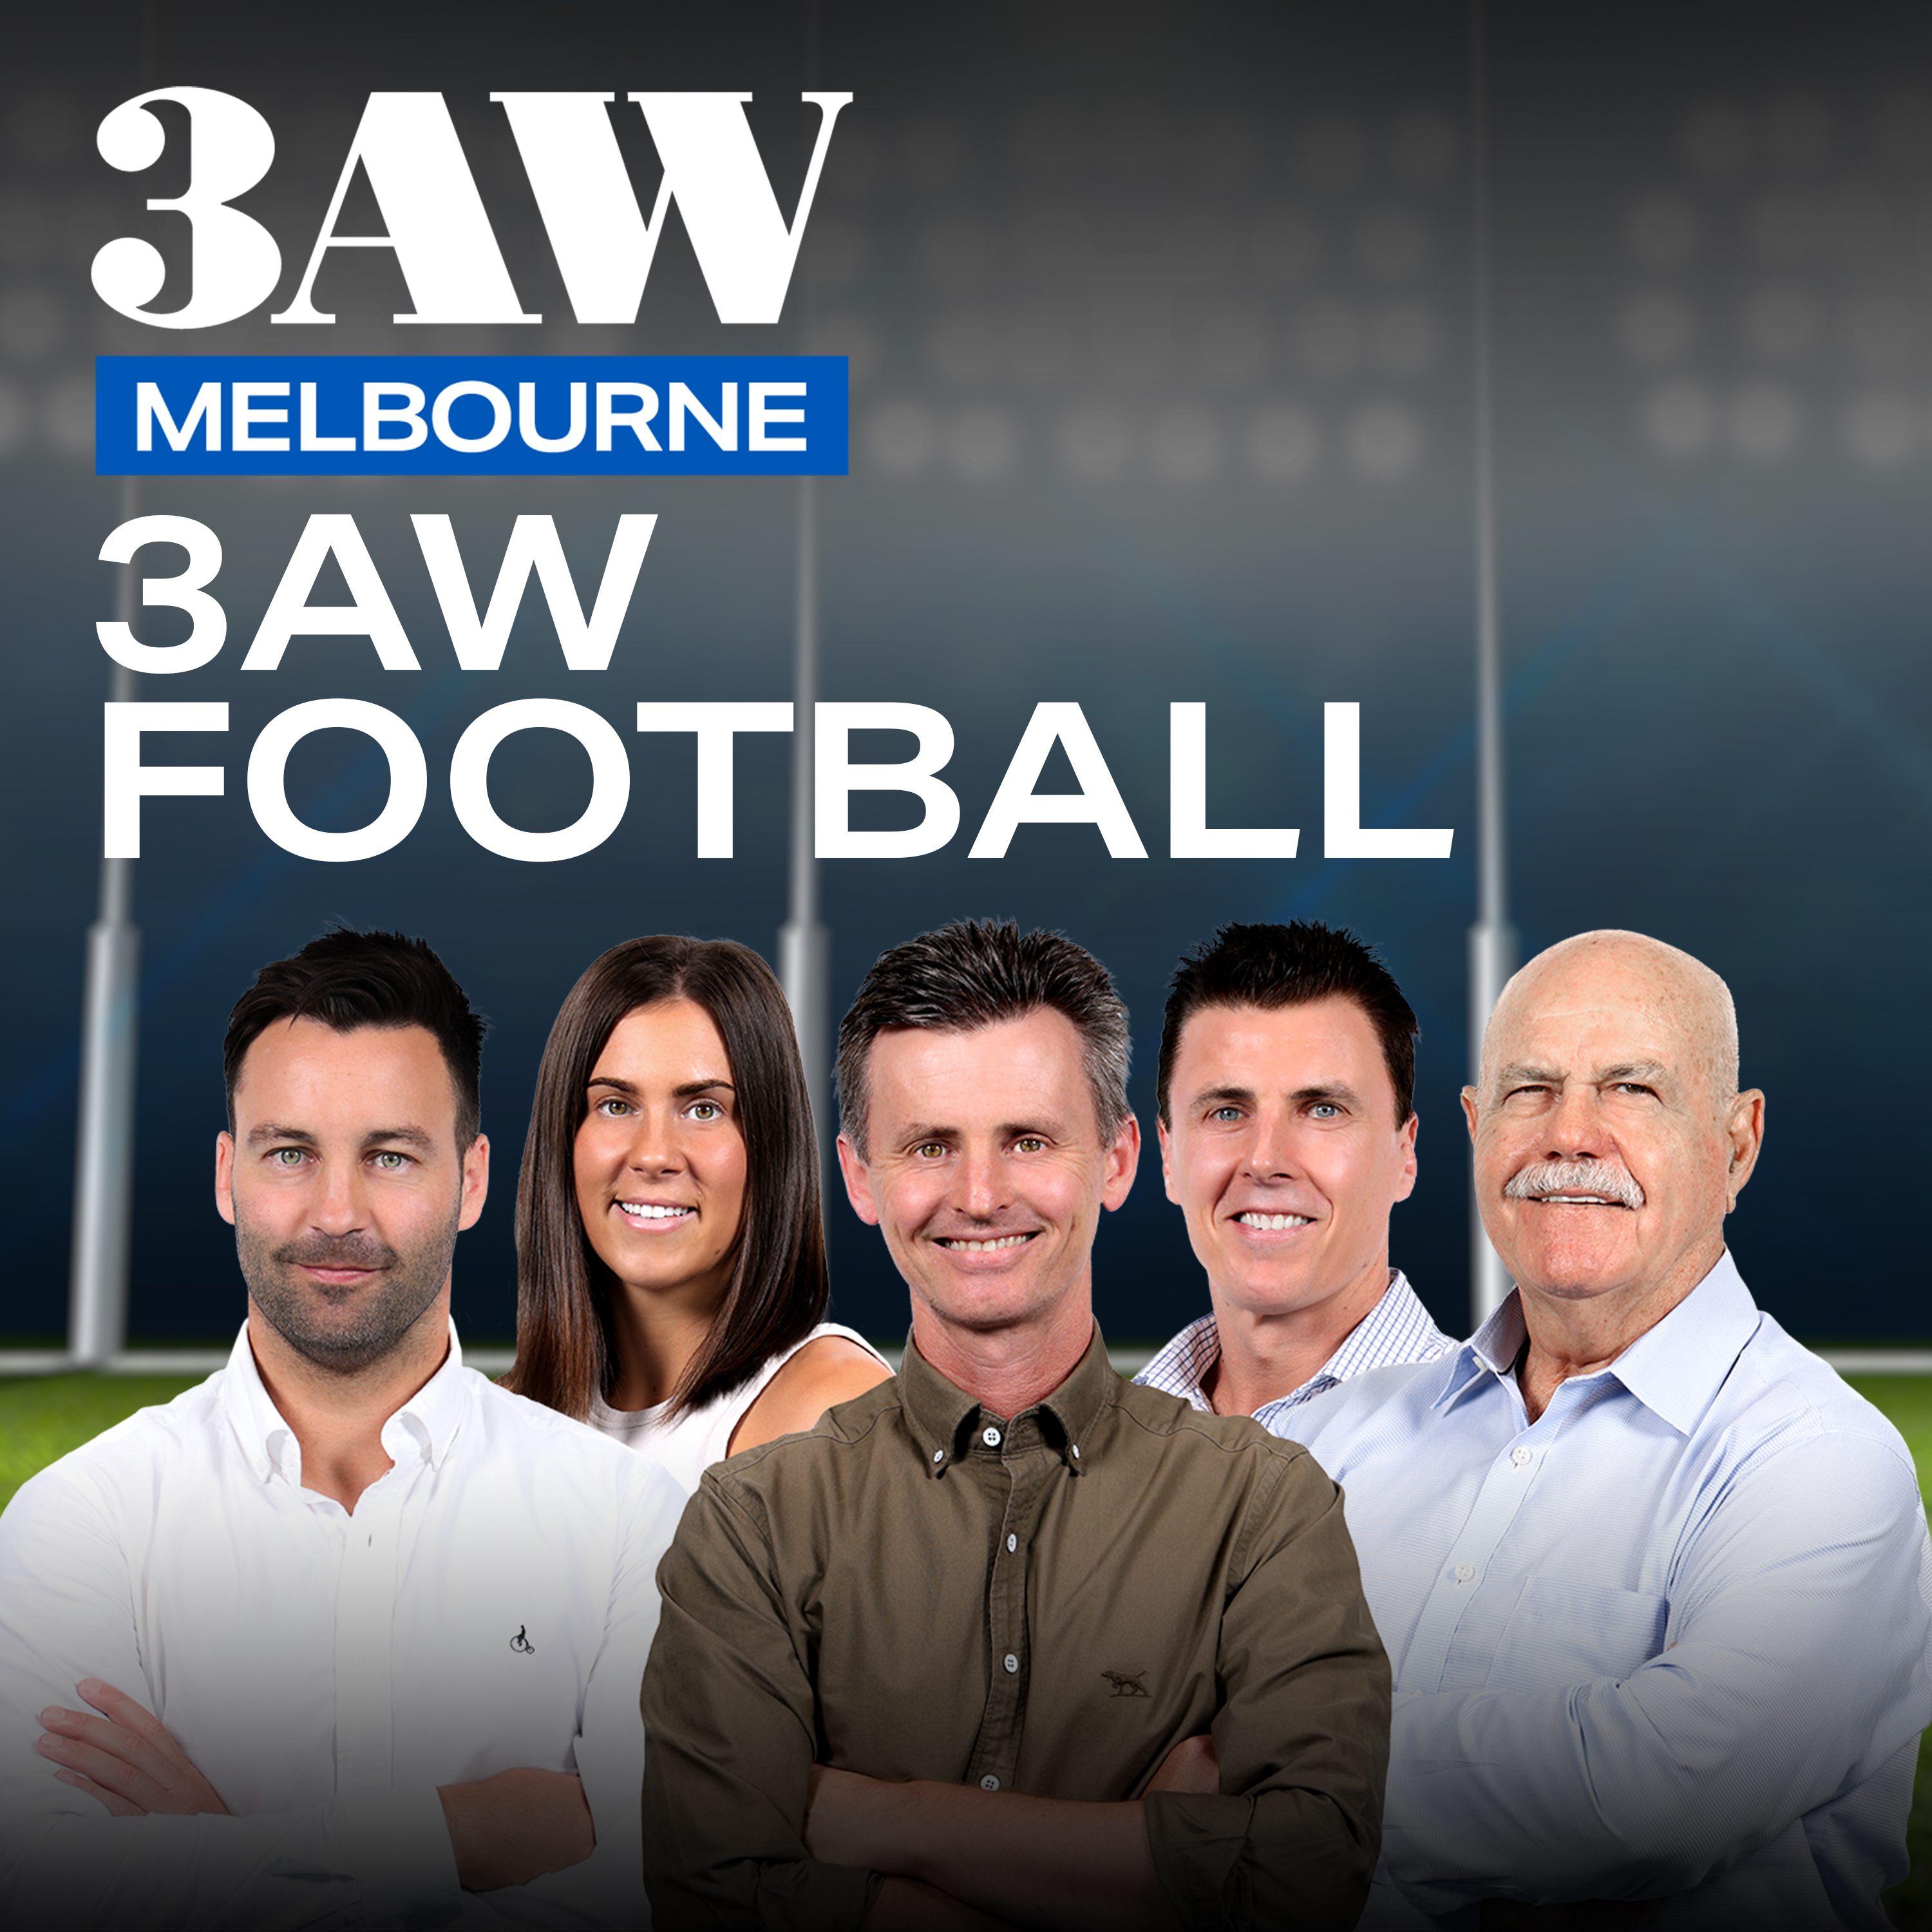 Sam Kekovich roasts entire 3AW Football team in hilarious interview!